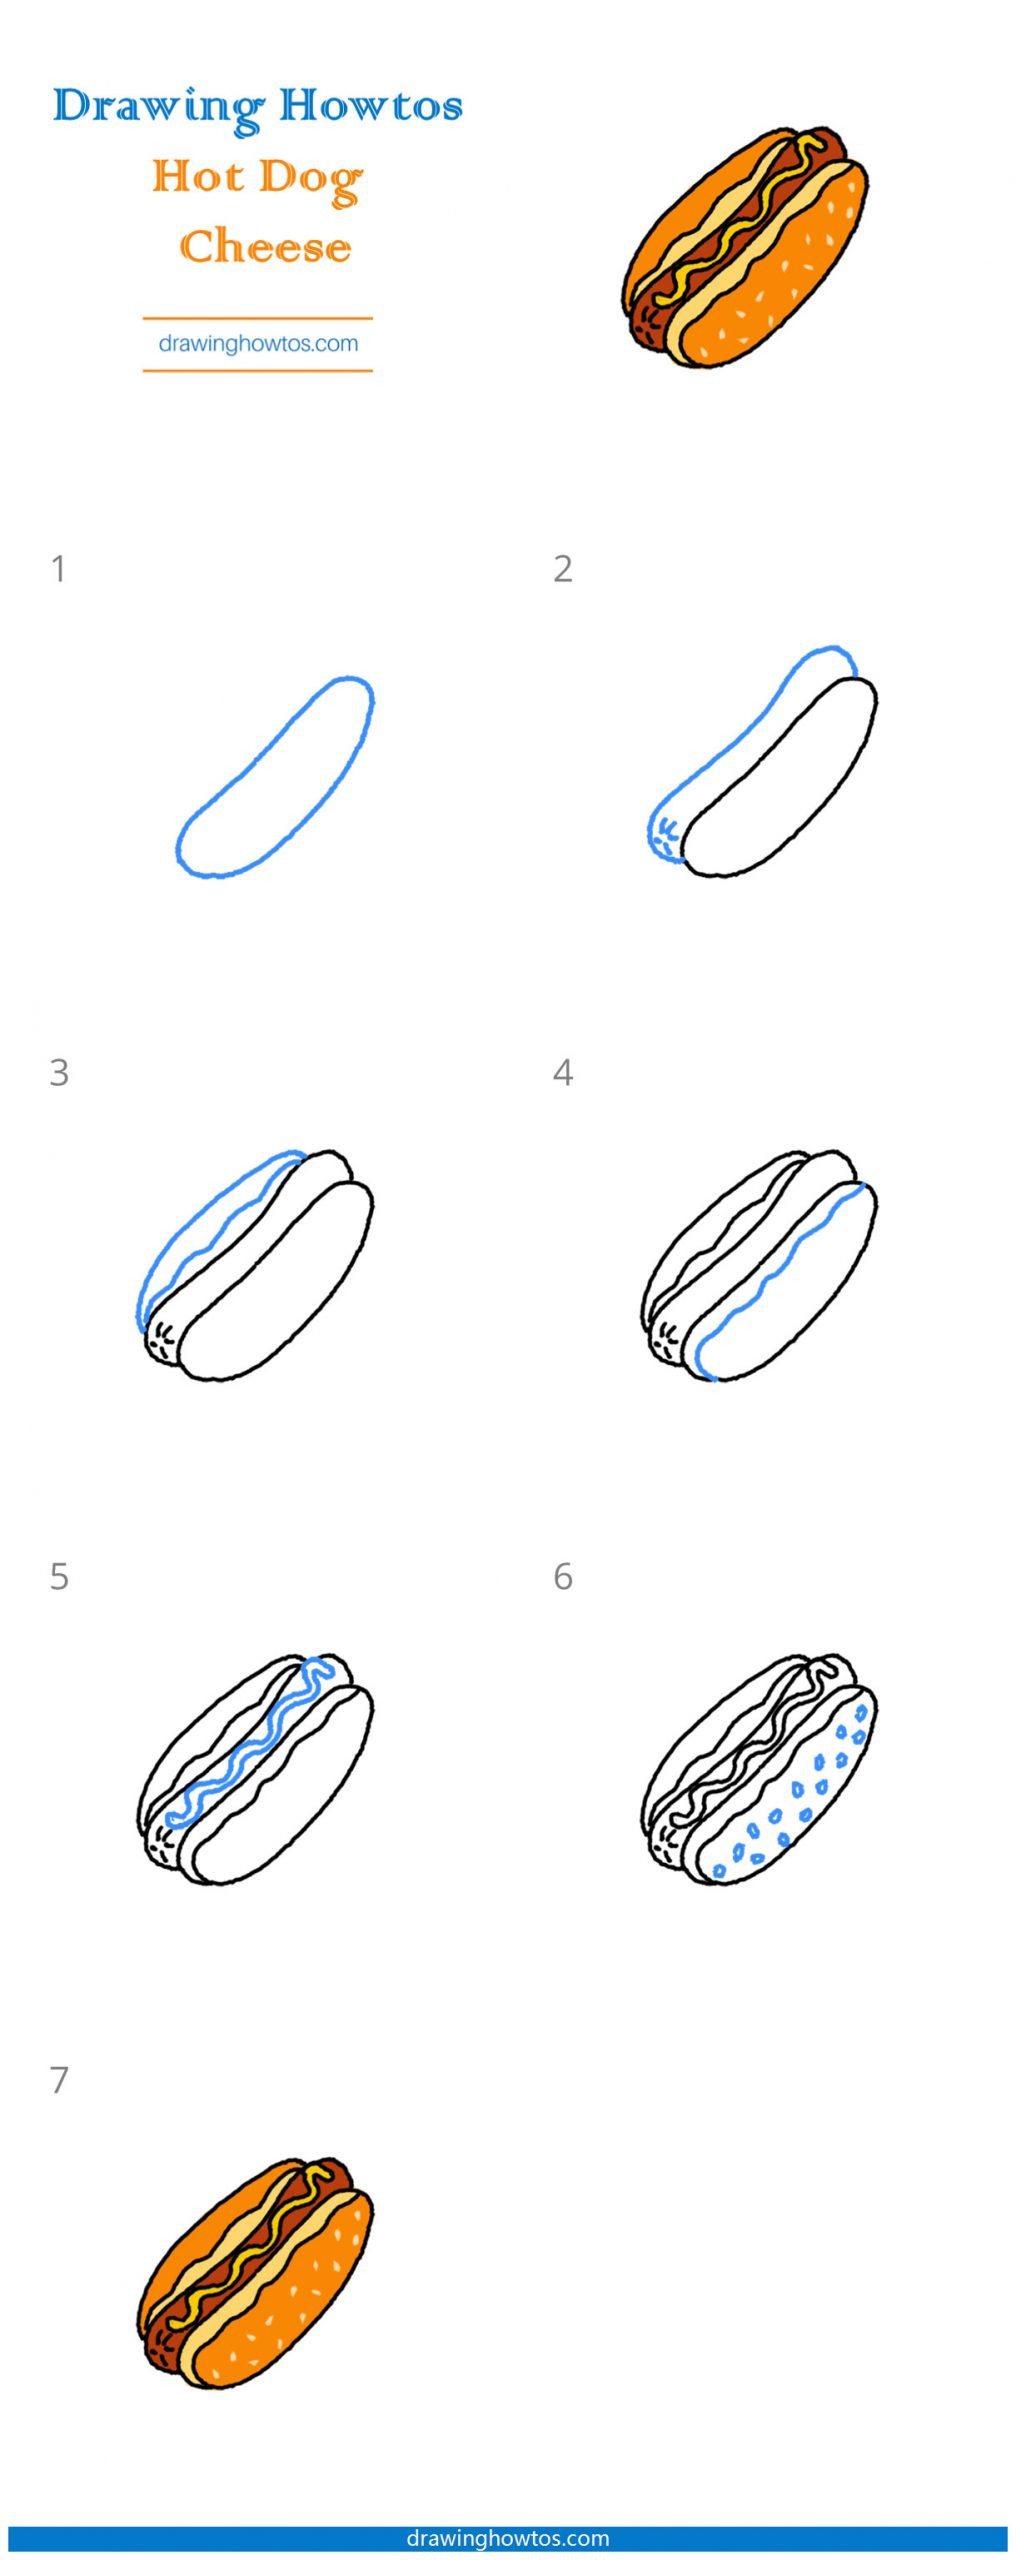 How to Draw a Cheese Hotdog Step by Step